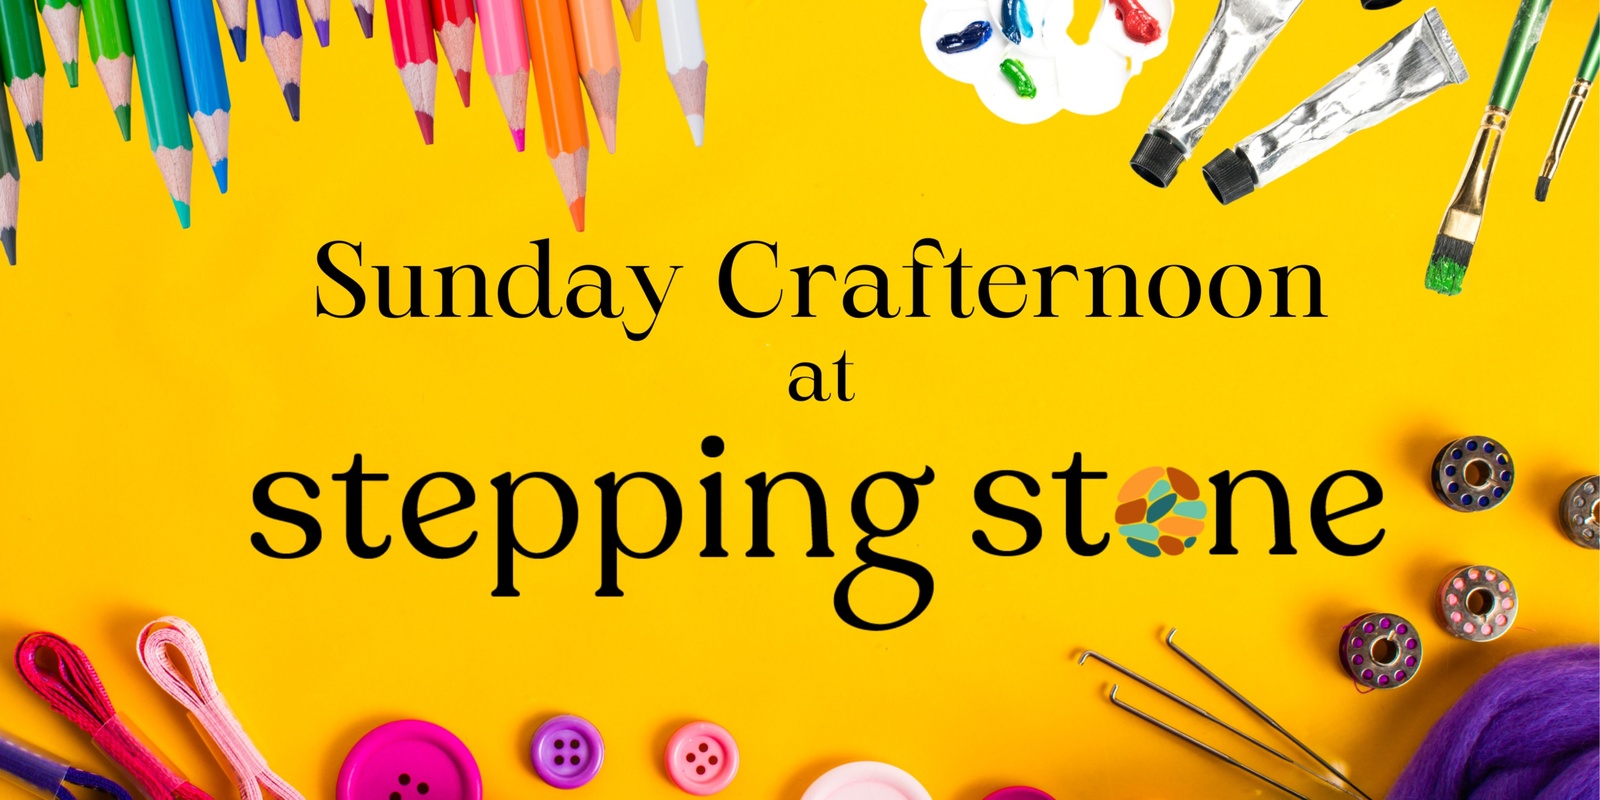 Banner image for Stepping Stone Crafternoon @ STRATHNAIRN *FREE*